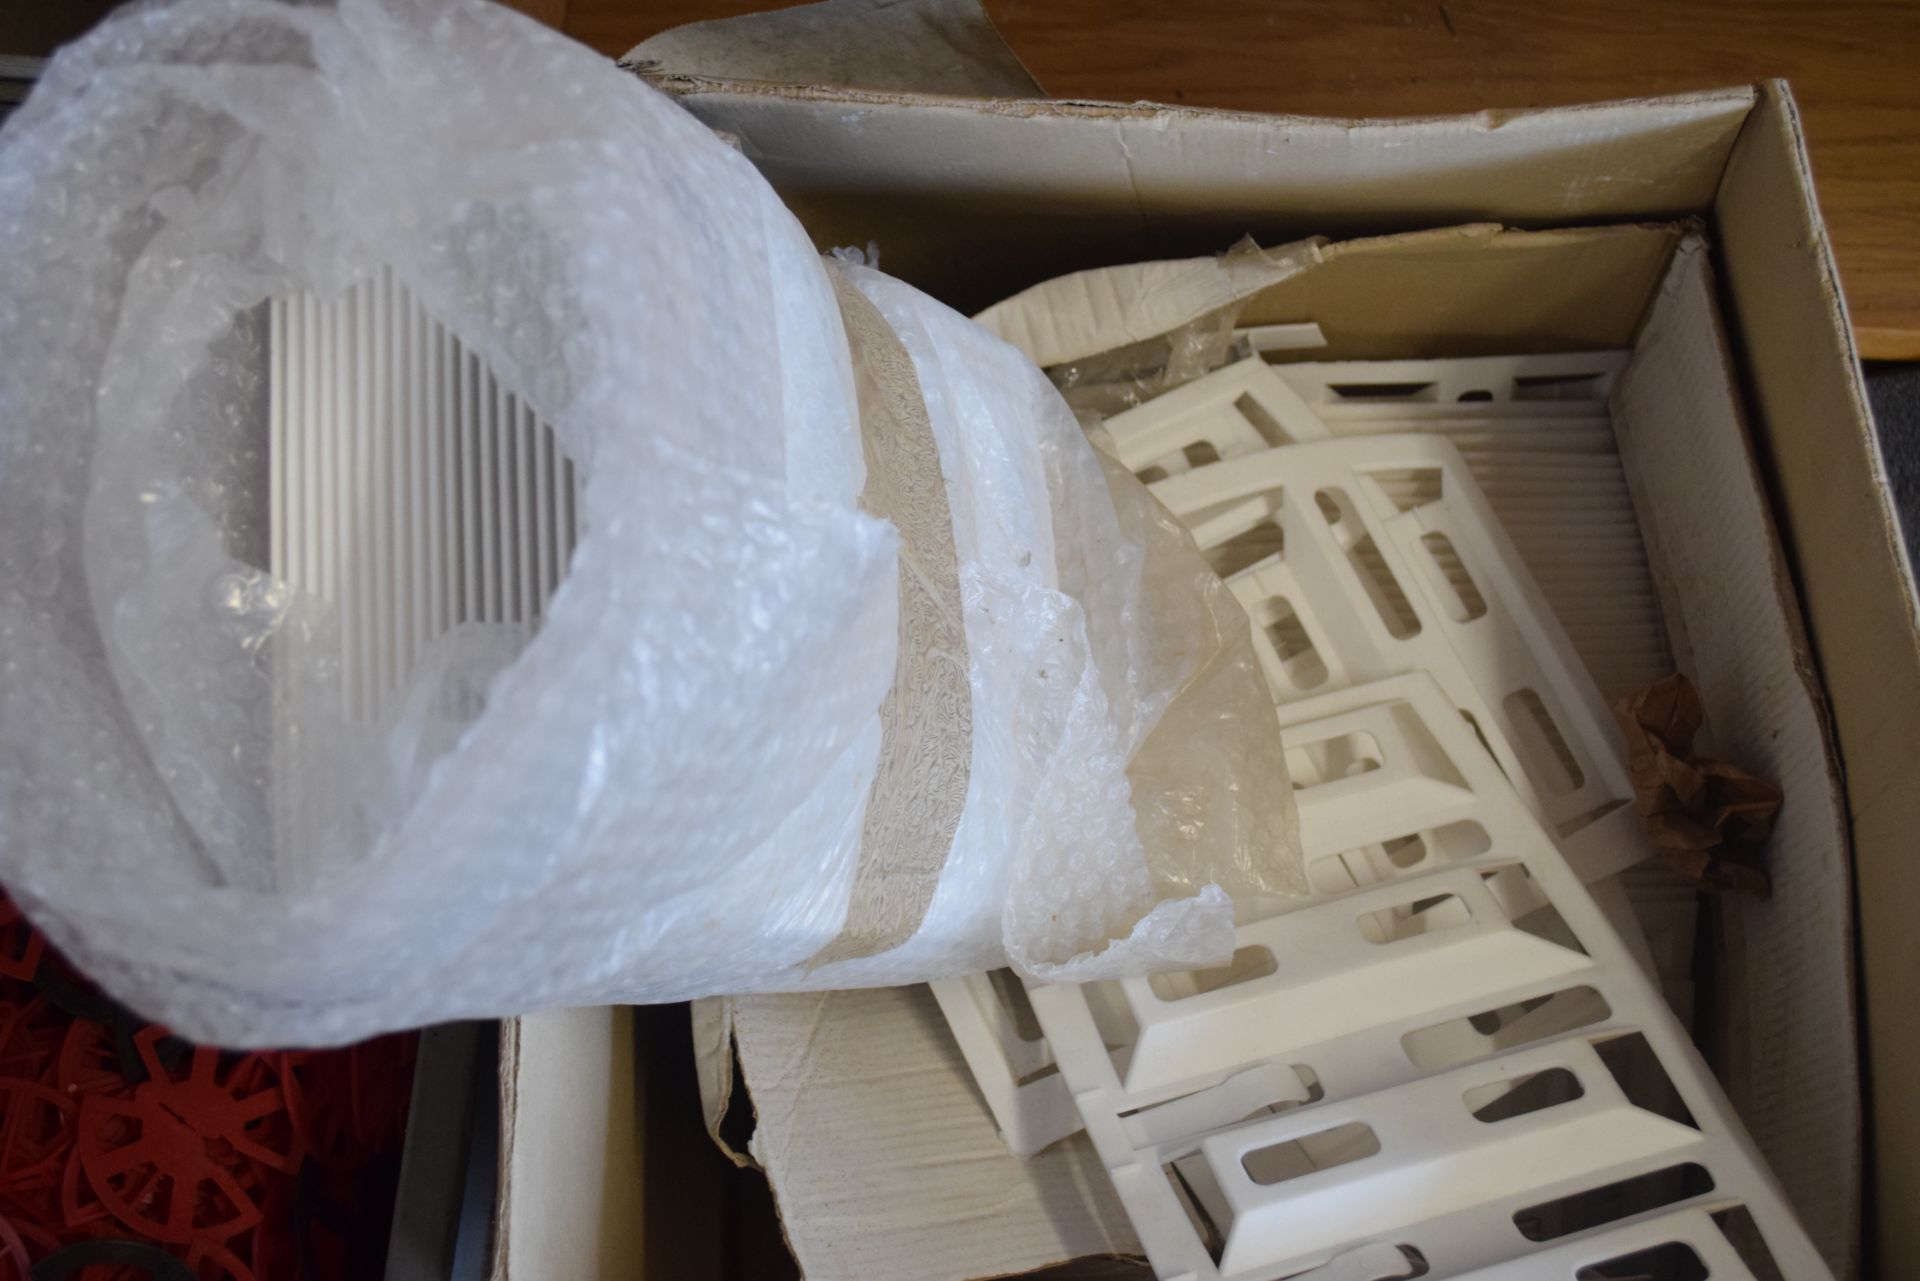 BOX OF VENTING TILE SPACERS - Image 2 of 2